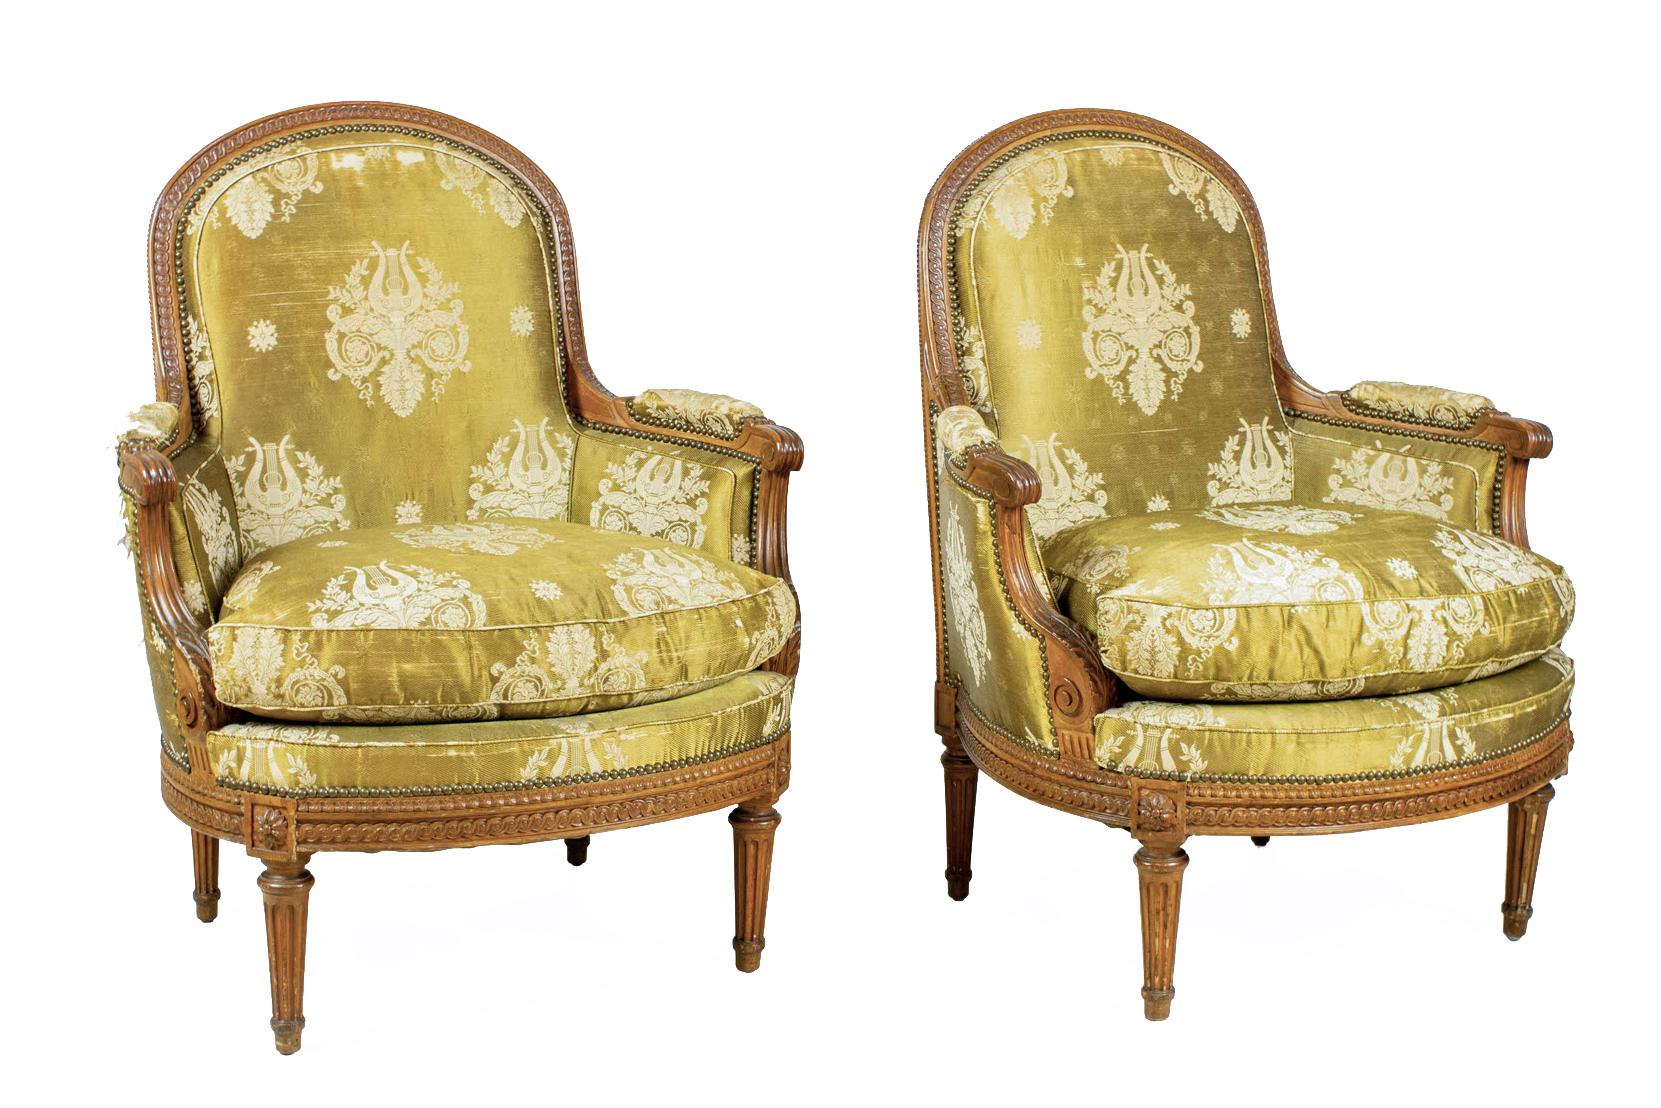 Pair of Louis XVI (18th century) carved beechwood bergeres / armchairs with carved beaded pattern edge on arched back and seat frame with acanthus and scroll carved arms and gold damask upholstery trimmed with nail head tacks (priced as pair).